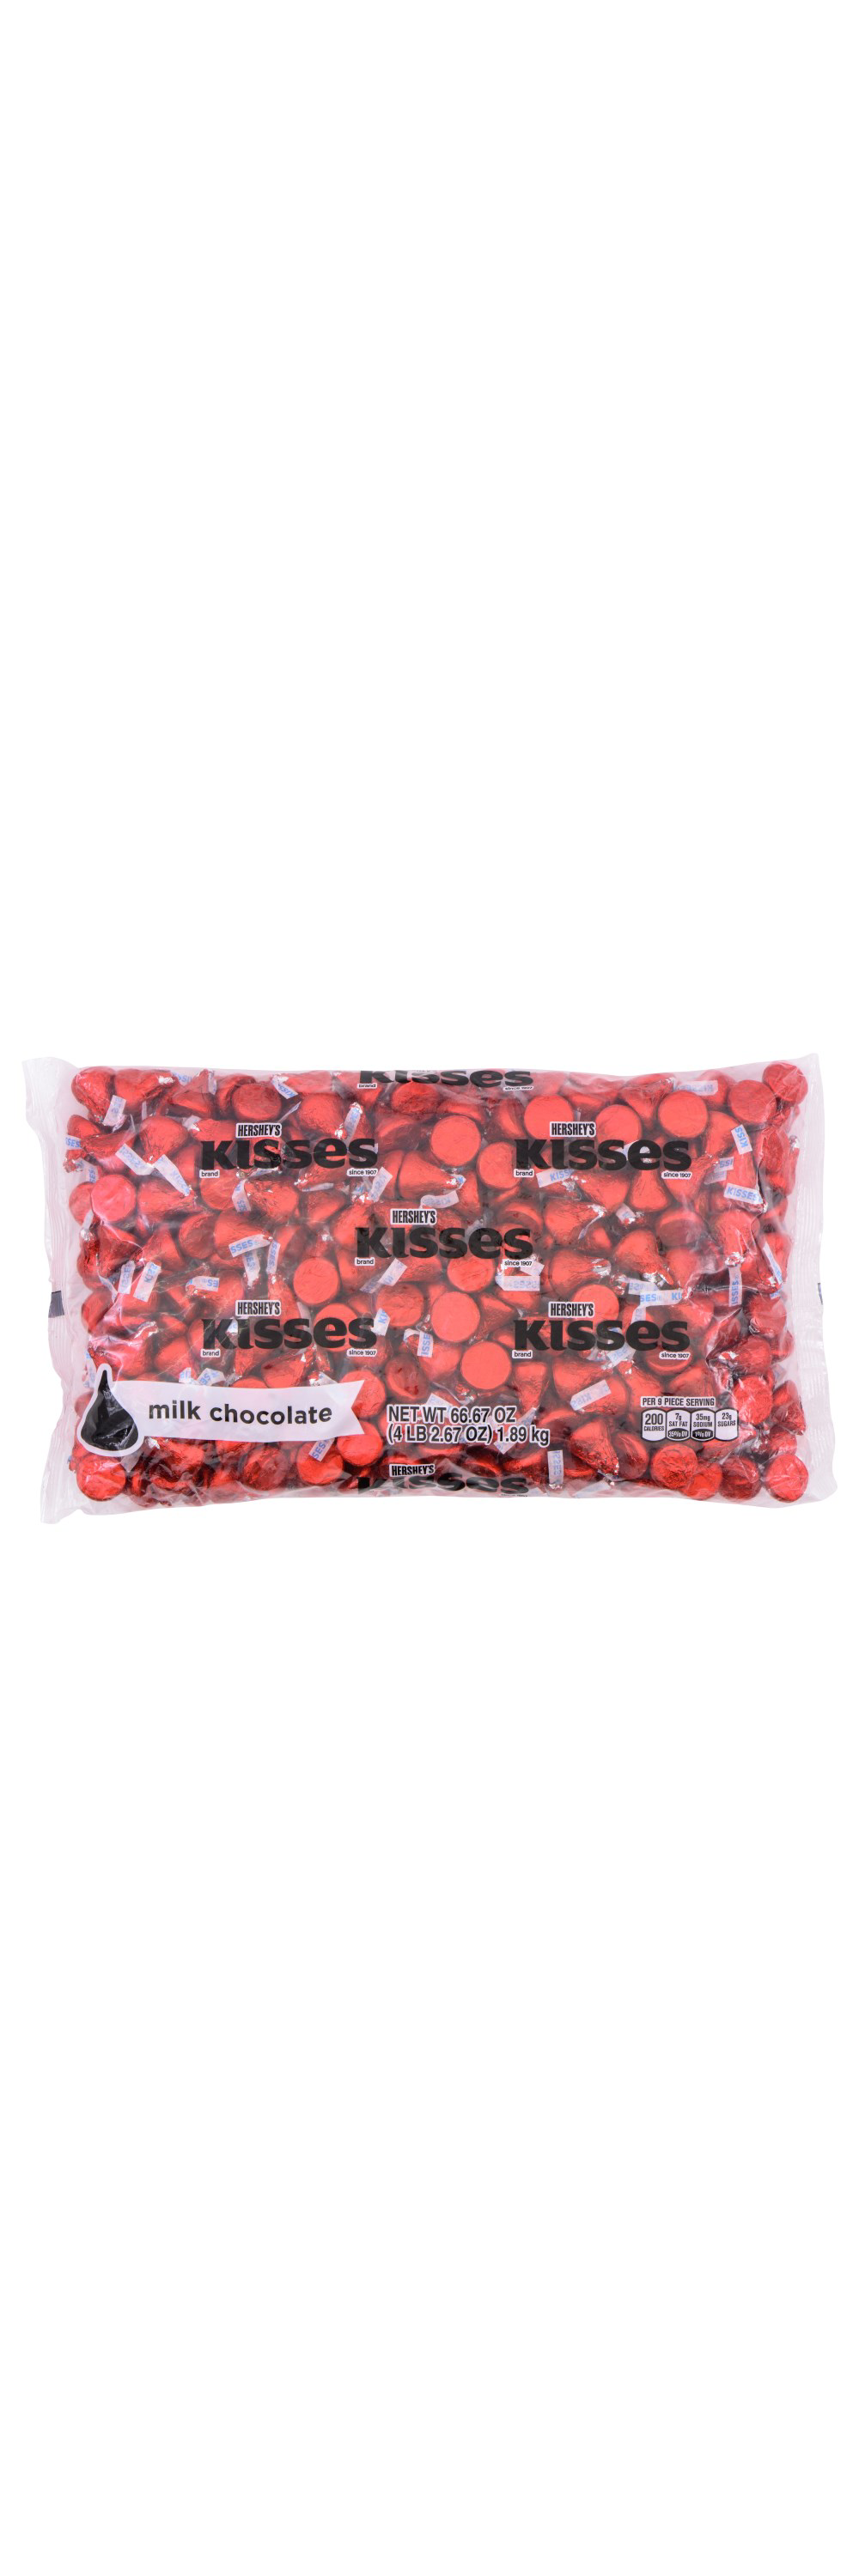 HERSHEY'S KISSES Red Foil Milk Chocolate Candy, 66.67 oz bag, 400 pieces - Front of Package